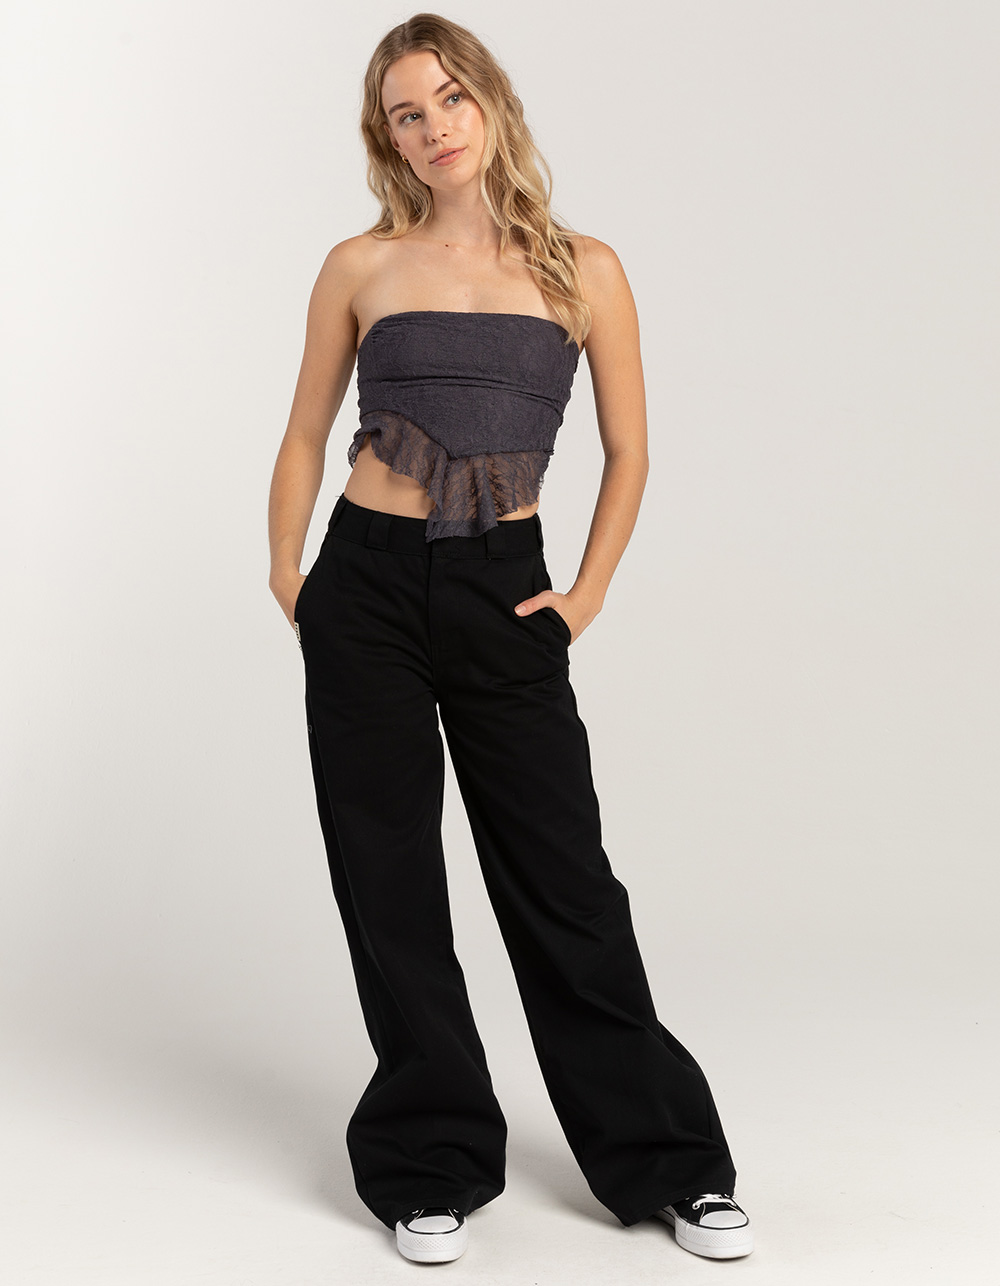 Women Frill Pant with lace ankle length